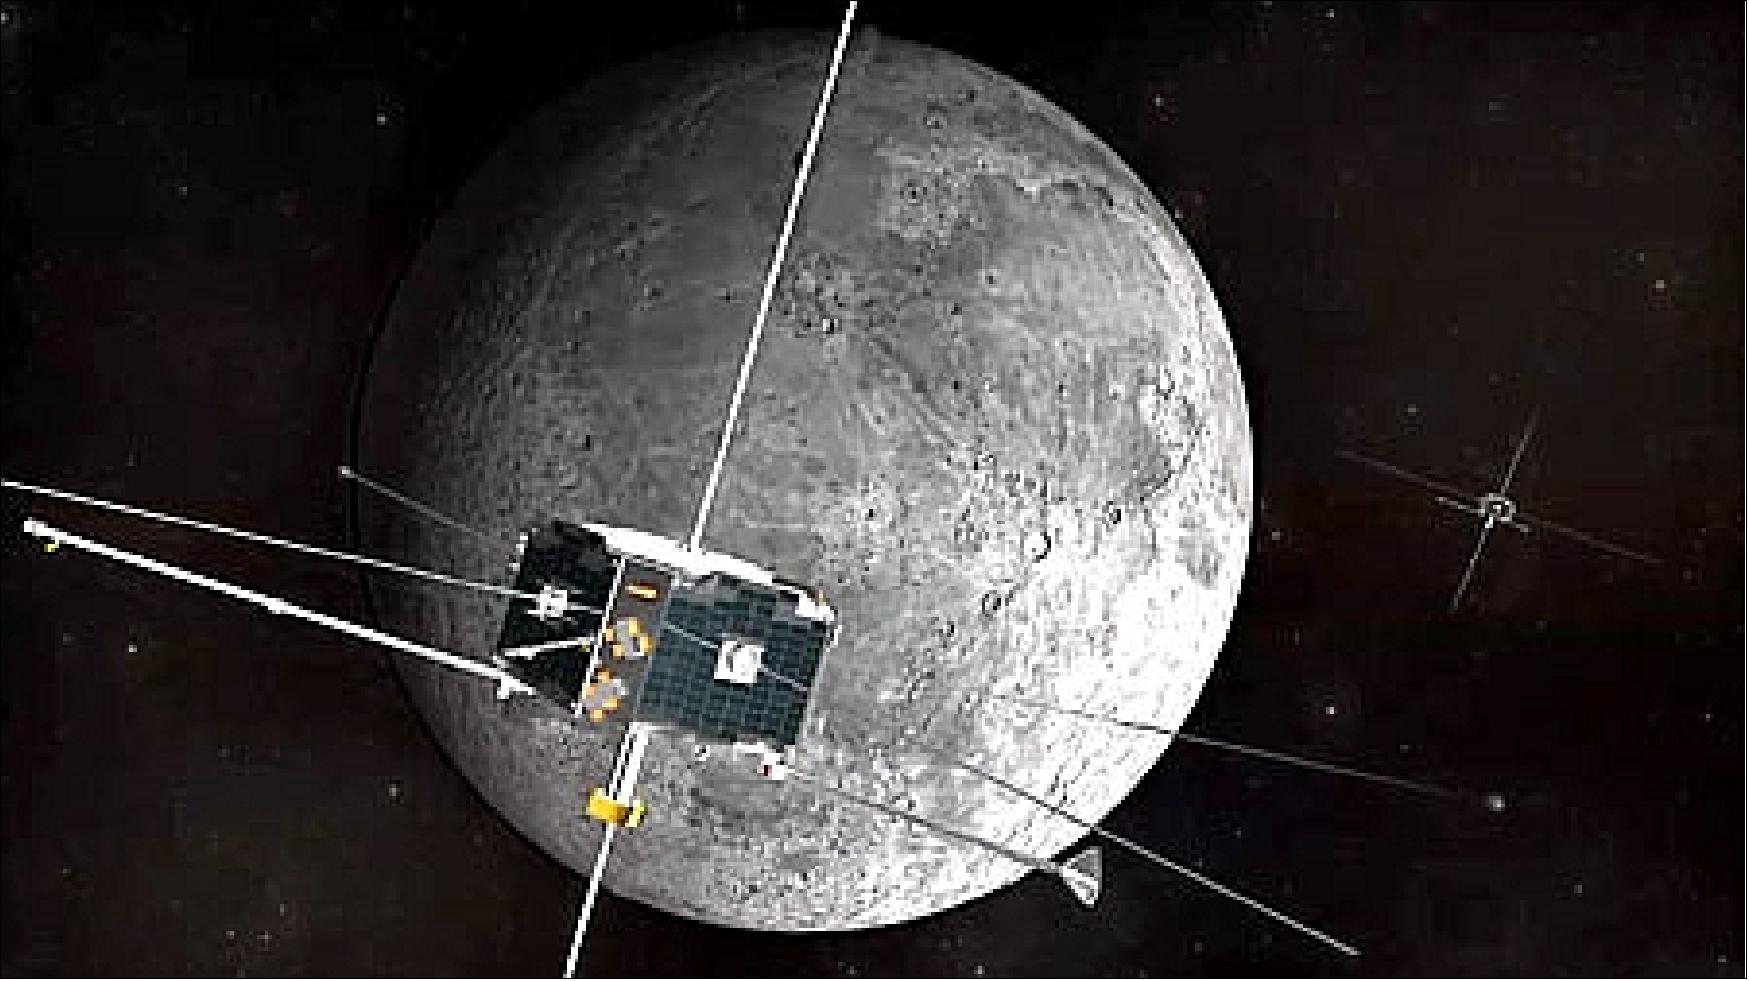 Figure 44: An artist's concept of one of the twin ARTEMIS probes in orbit around the moon (image credit: UCB, Ref 57)